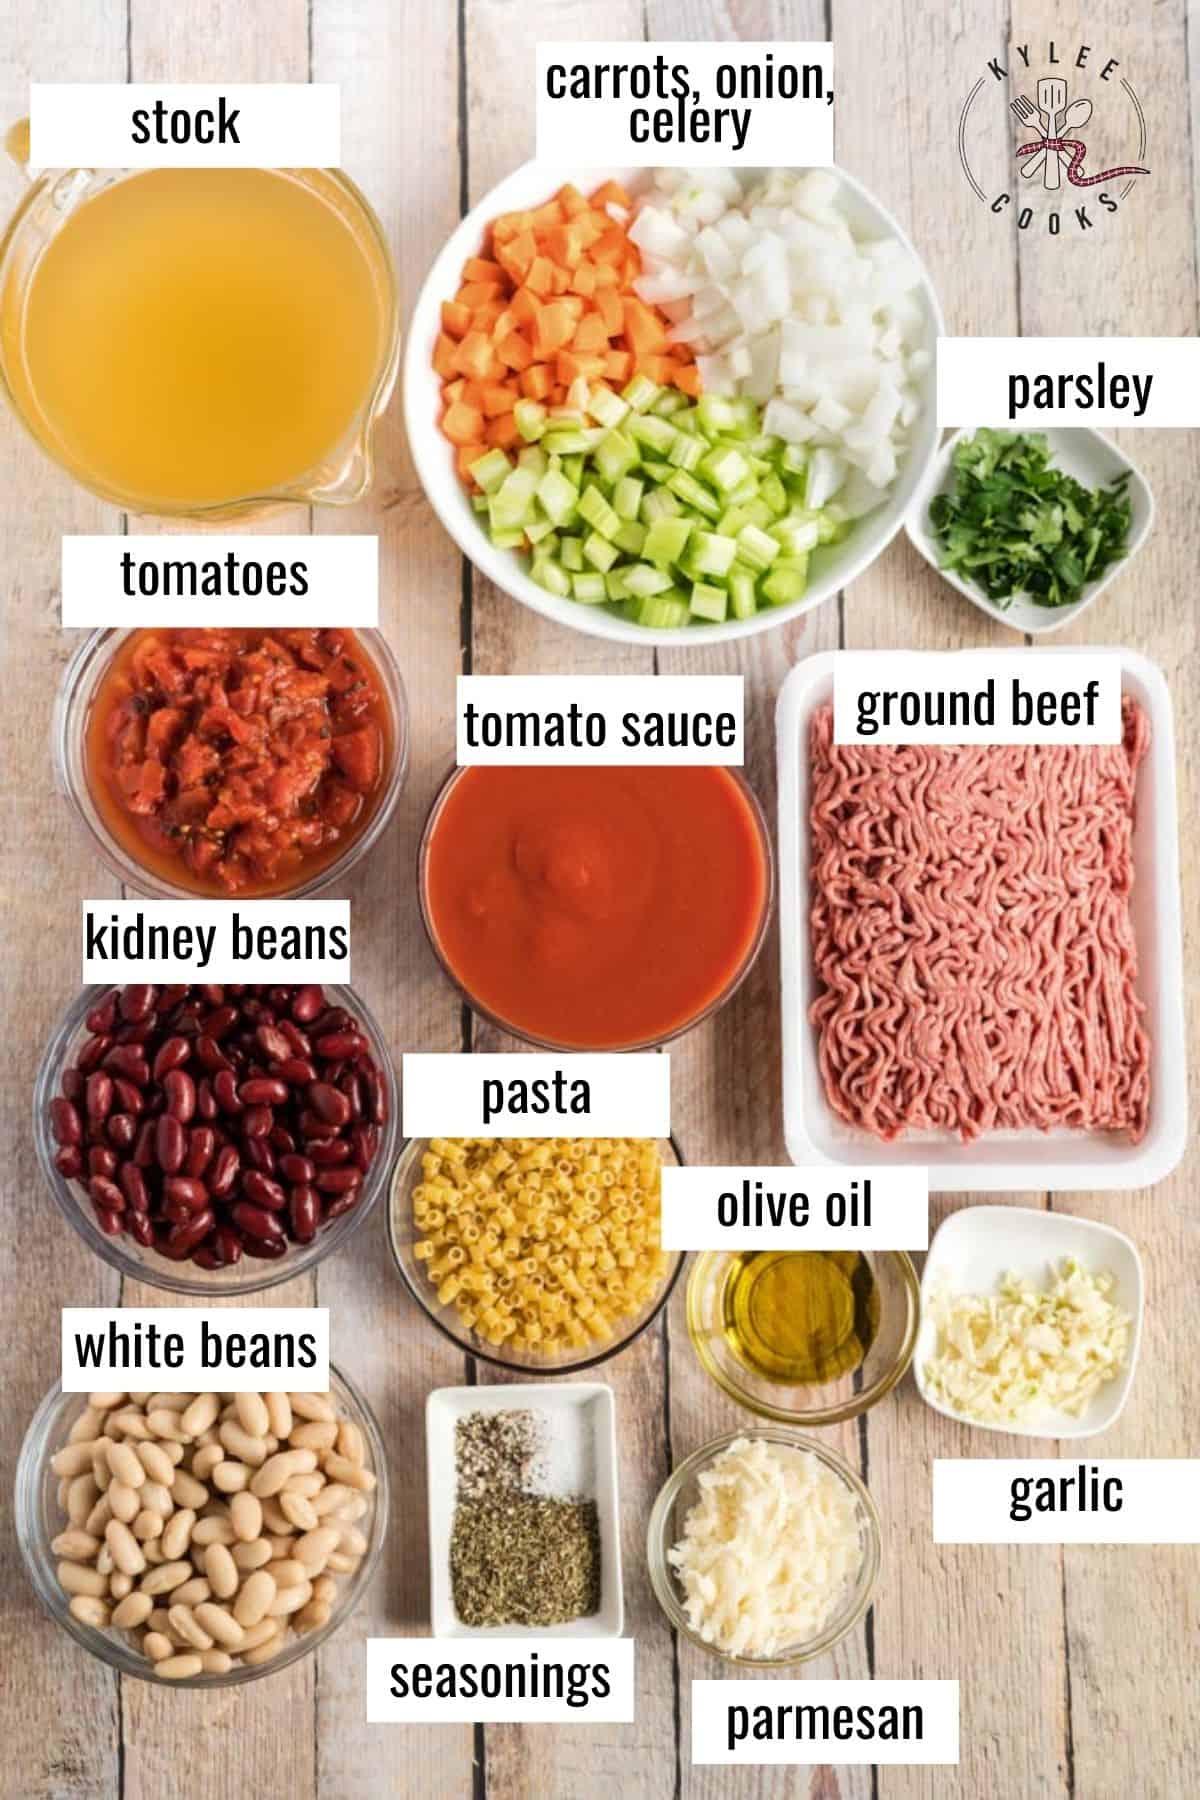 ingredients to make pasta fazool laid out and labeled